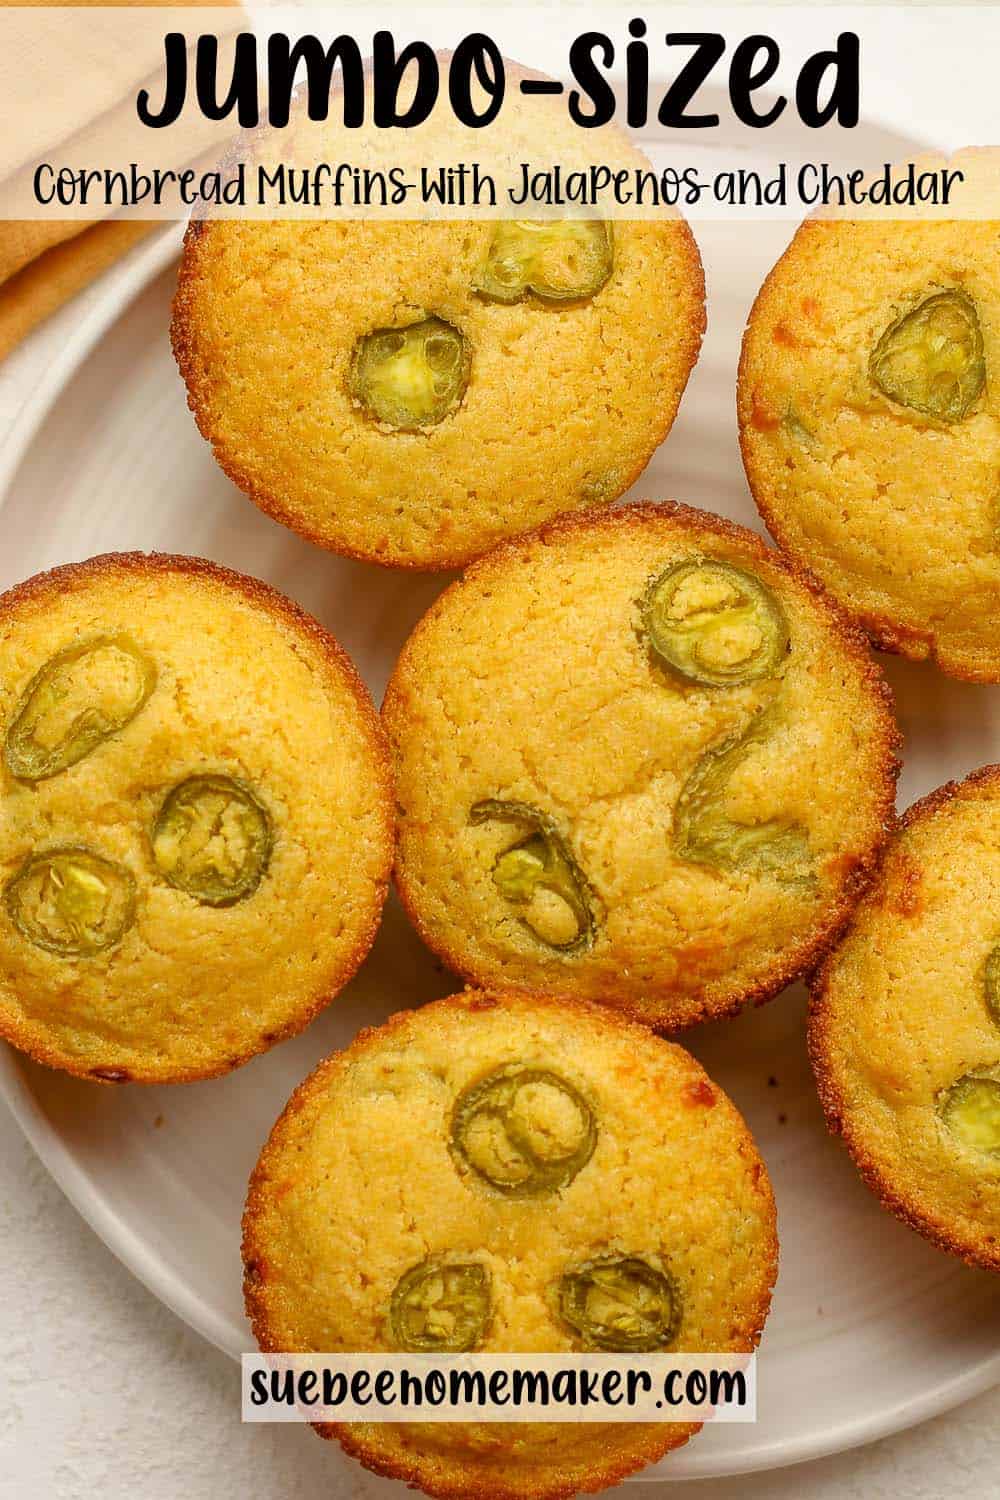 A plate of jumbo-sized cornbread muffins with jalapeños and cheddar cheese.